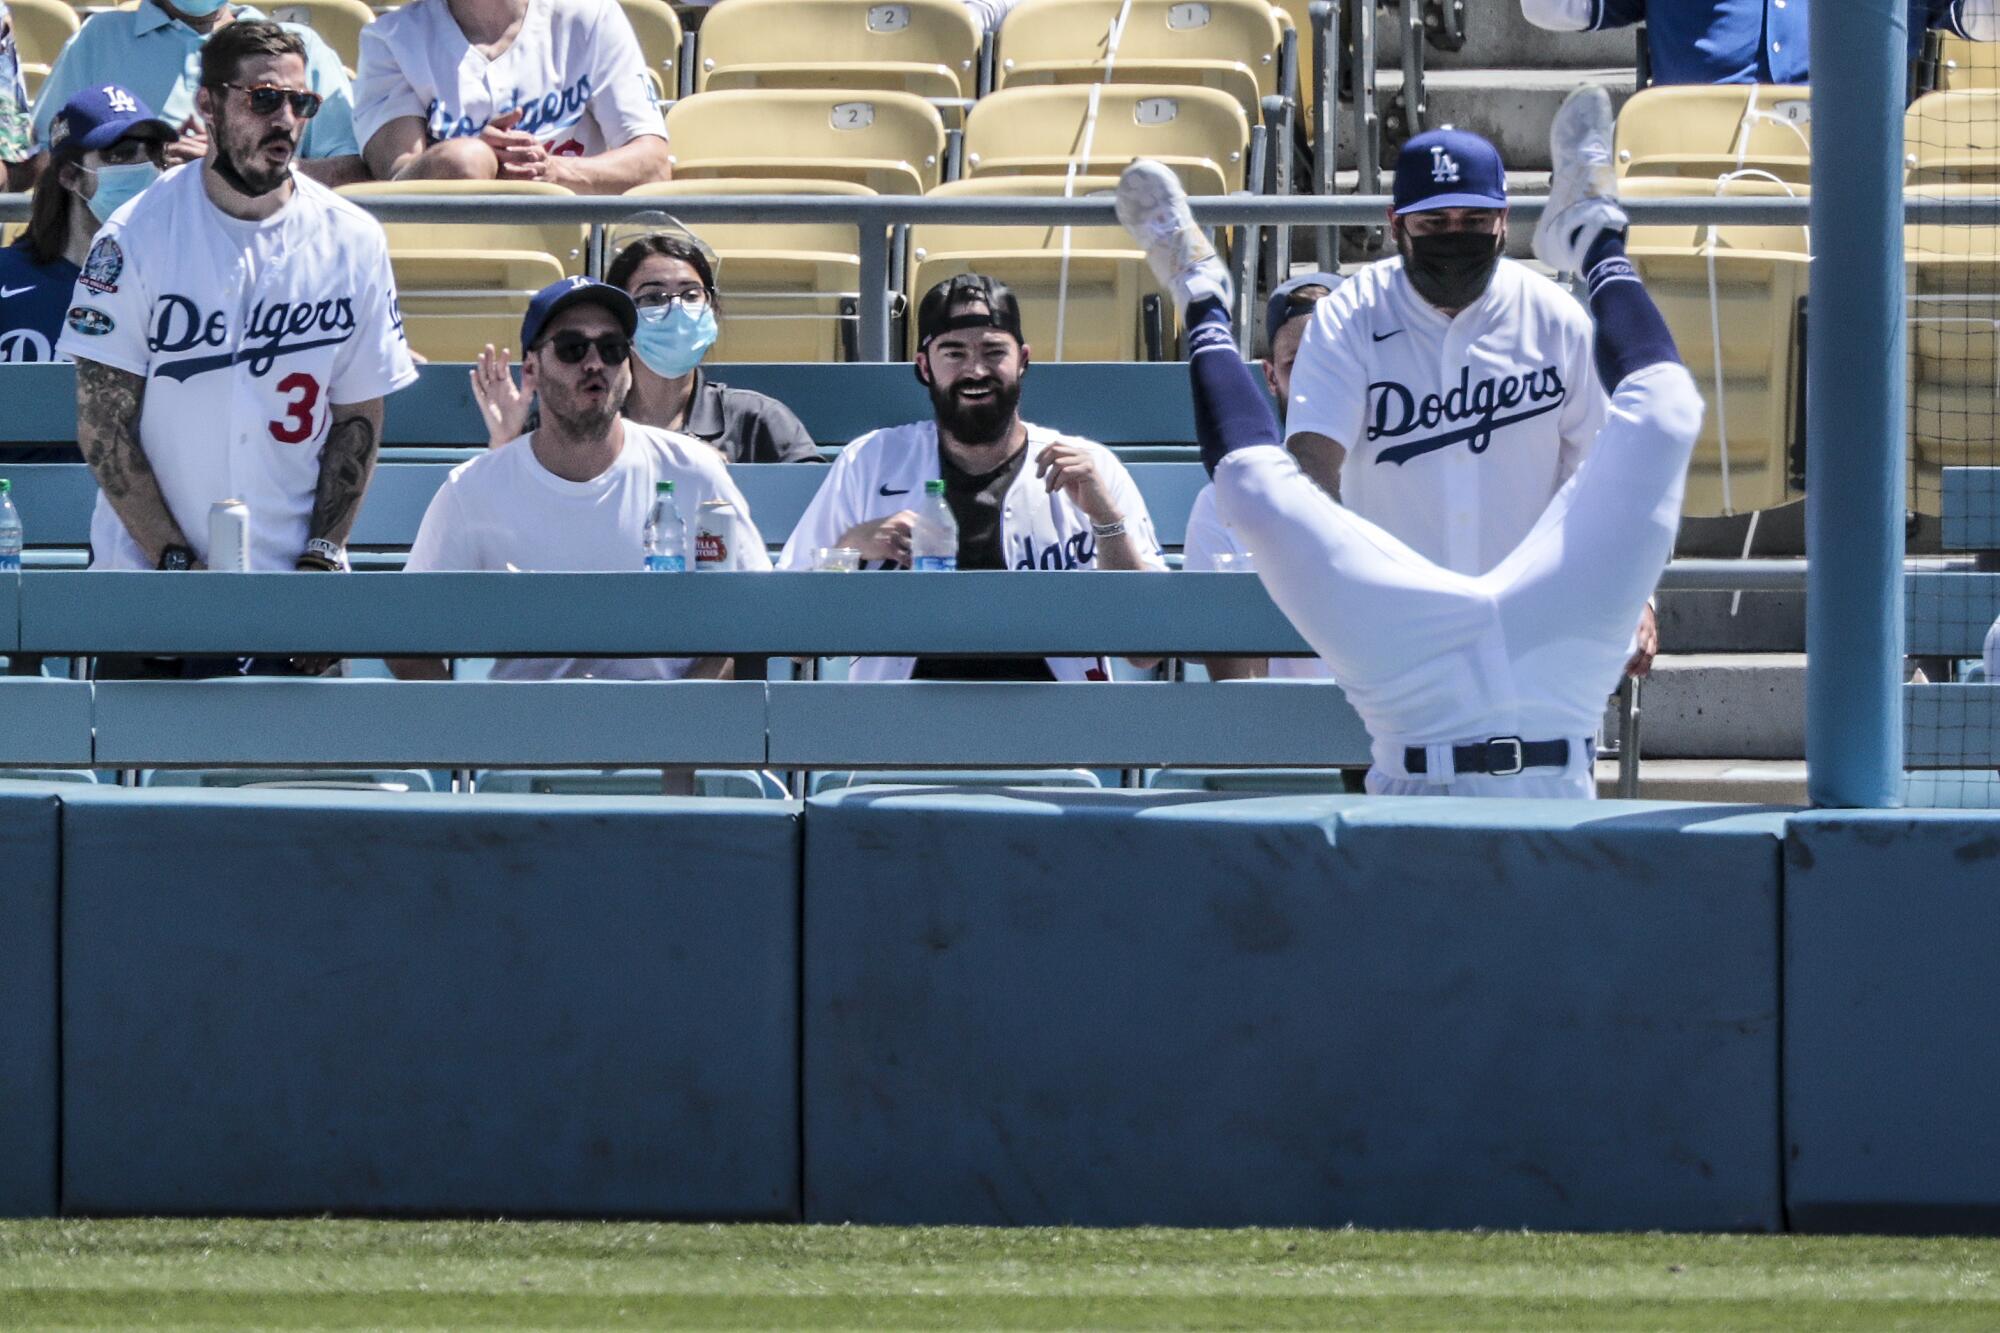 Dodgers second baseman Zach McKinstry tumbles over the wall after missing a foul ball in a game at Dodger Stadium.